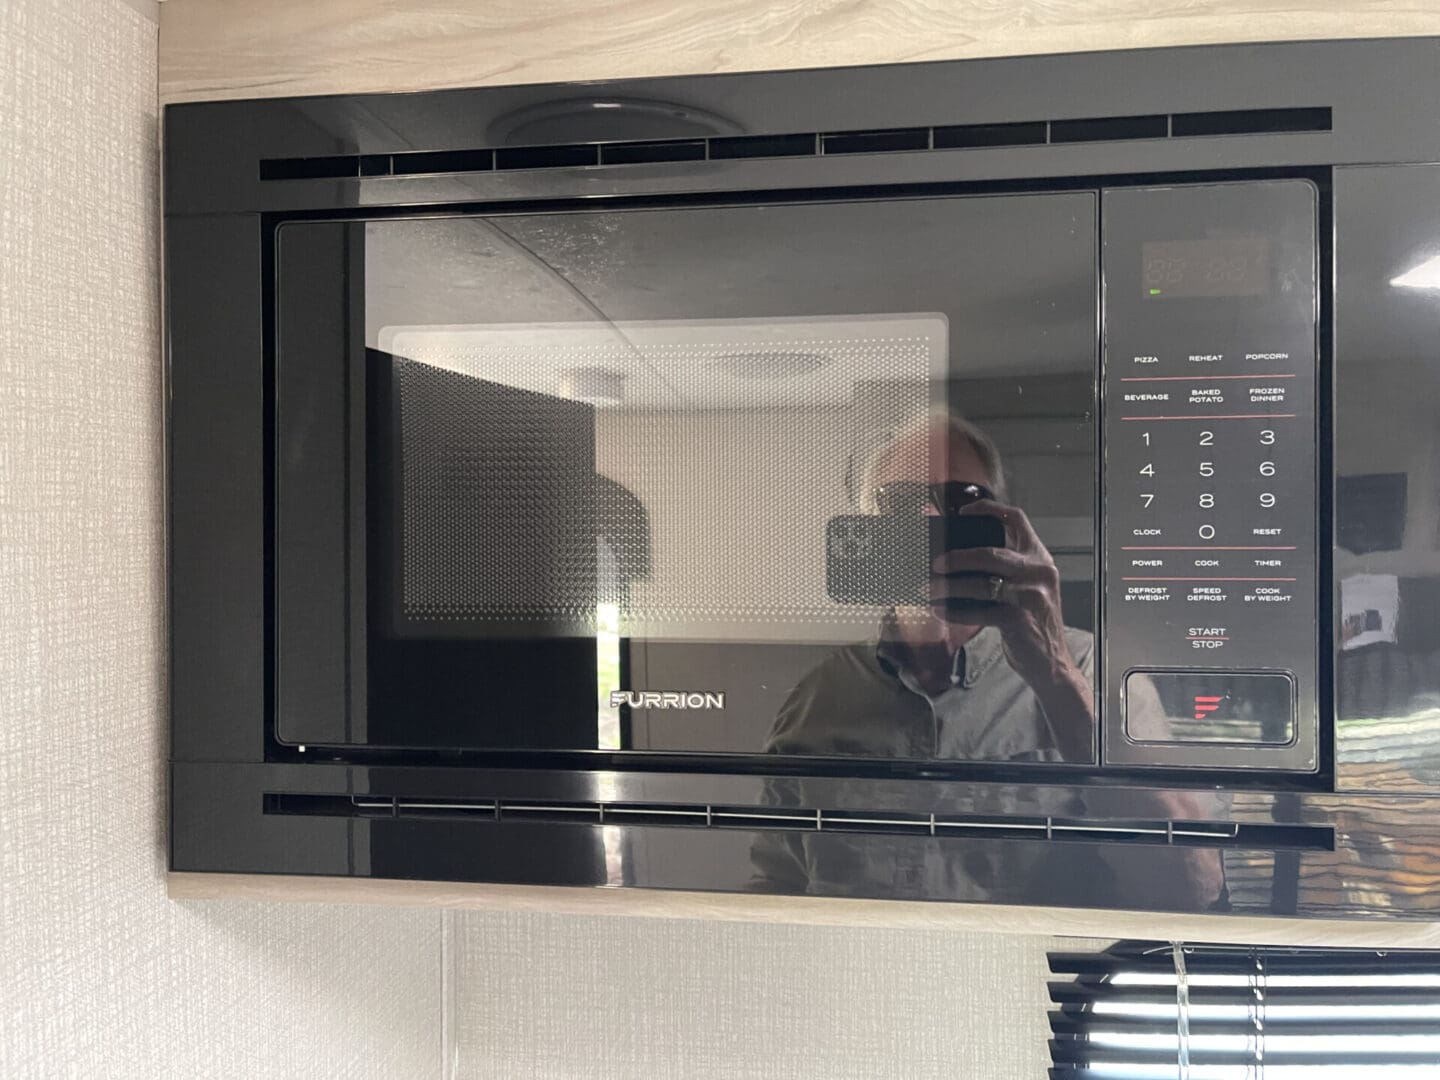 A Furrion microwave oven mounted on the wall